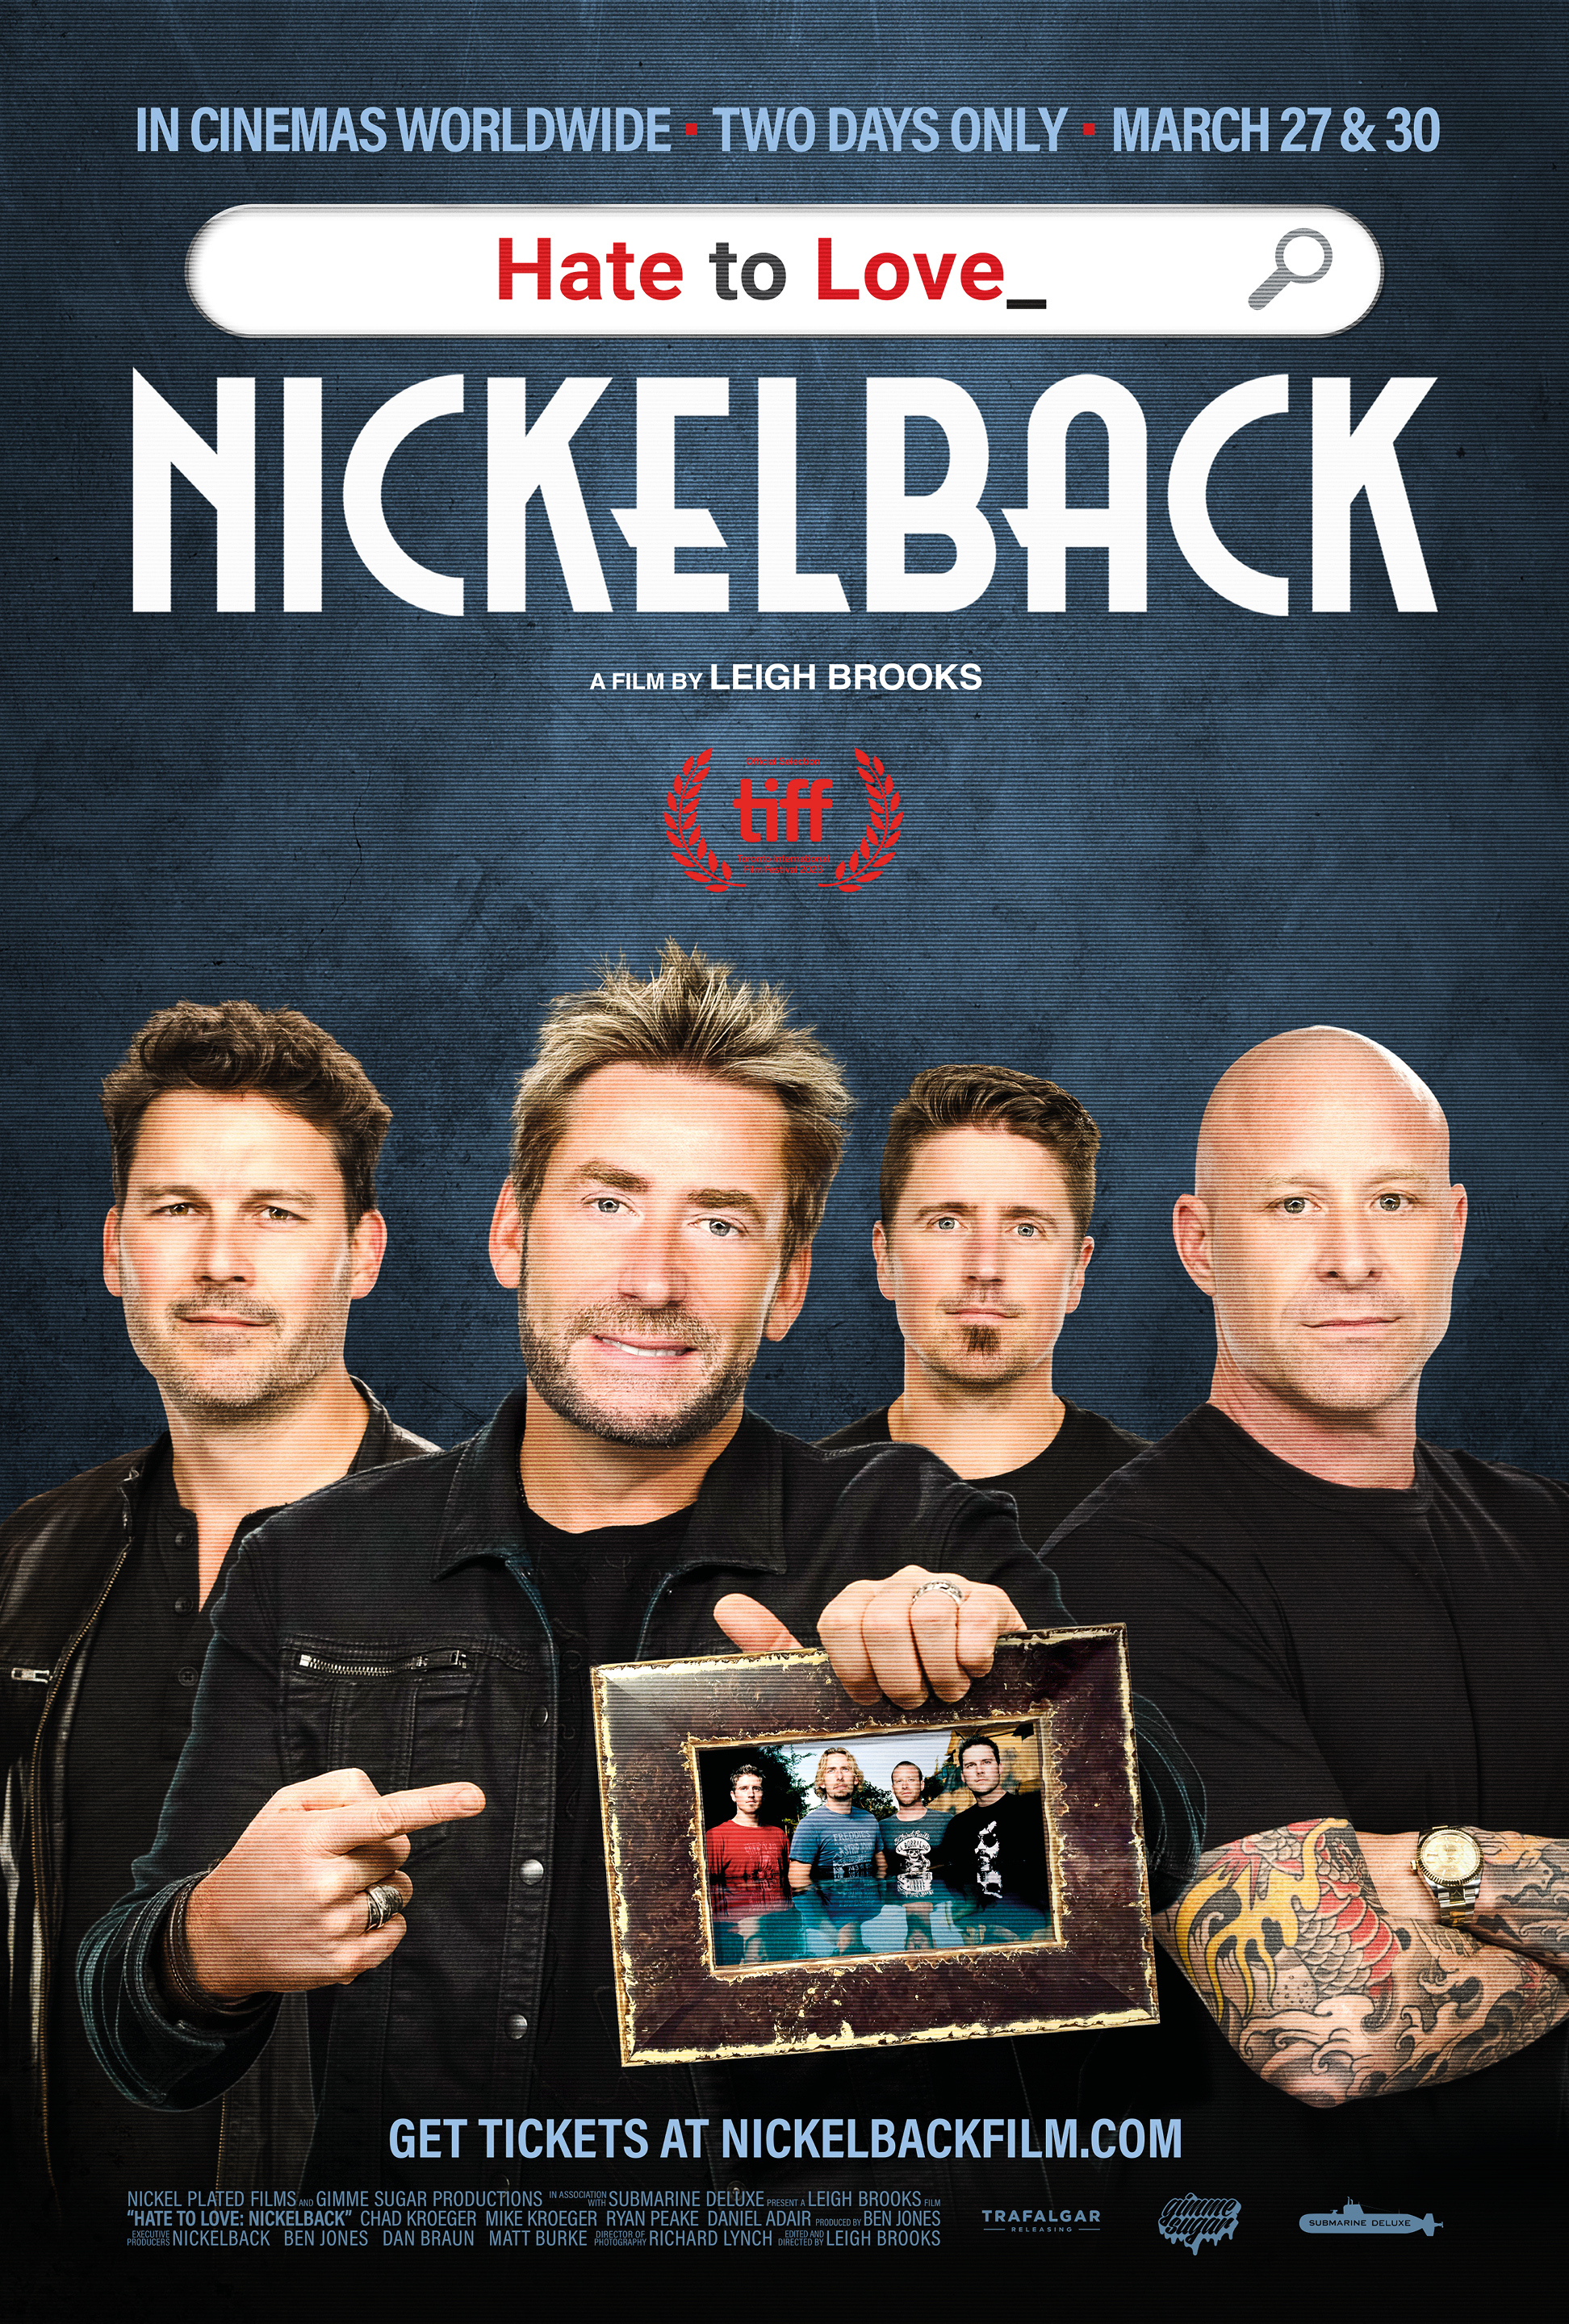 Hate To Love: Nickelback is in cinemas worldwide on March 27 and March 30